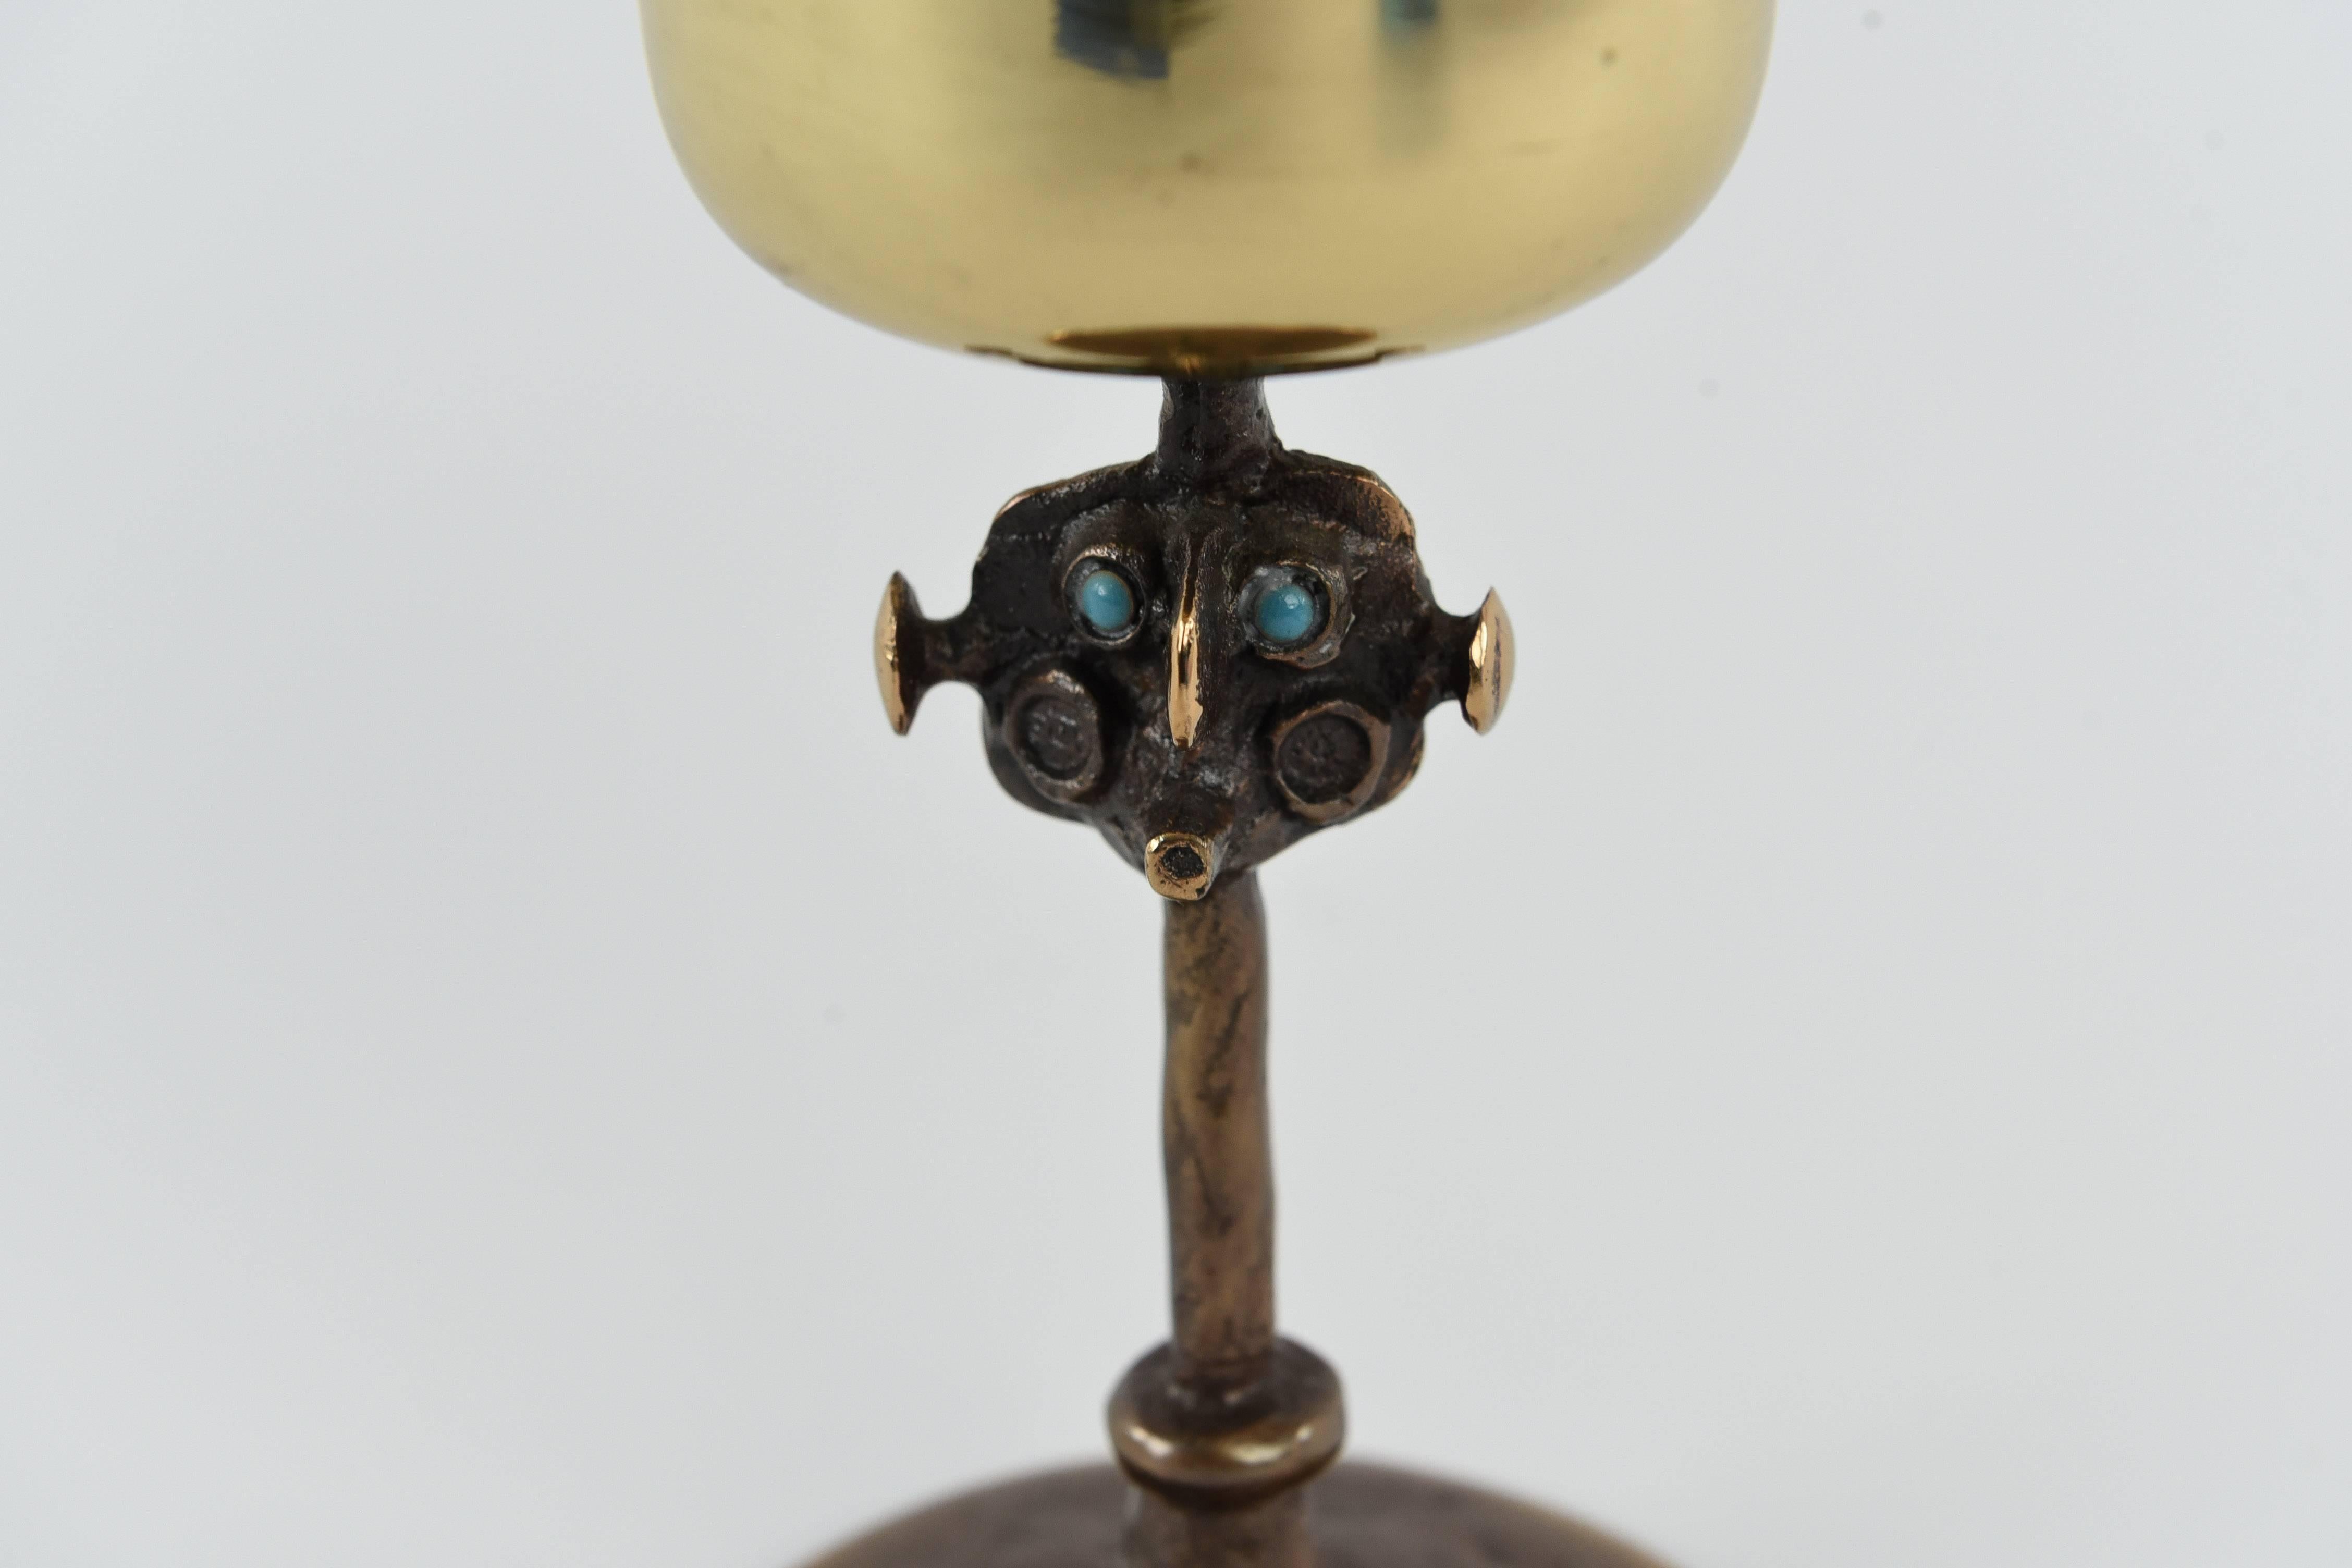 A whimsical brass sculpture of a figure with face and blue eyes. Handmade, circa 1970s.